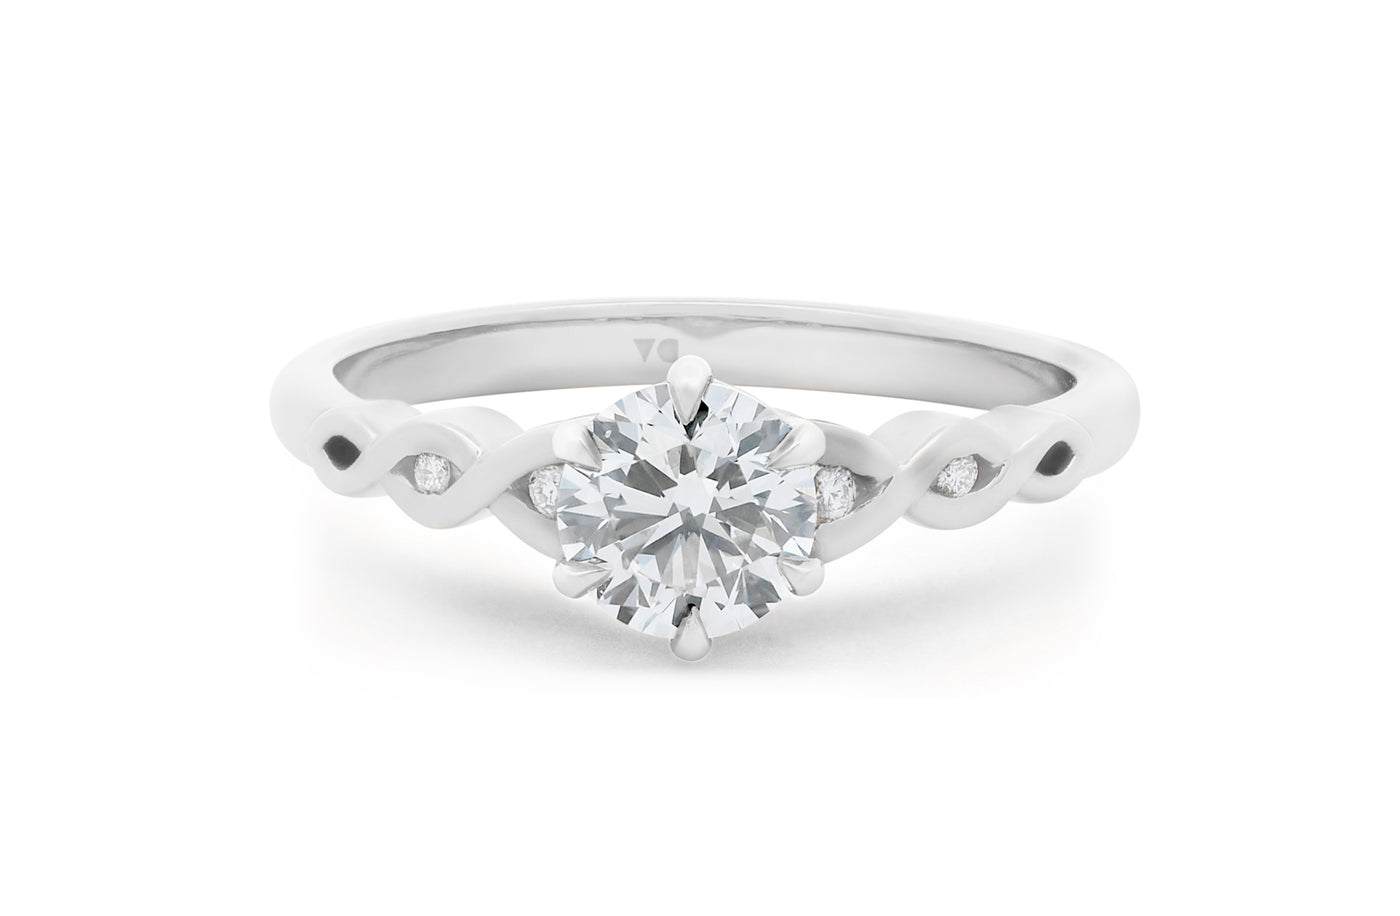 Pikorua: Brilliant Cut Diamond Solitaire Ring in 18ct White Gold or Platinum, from The Narrative Collection